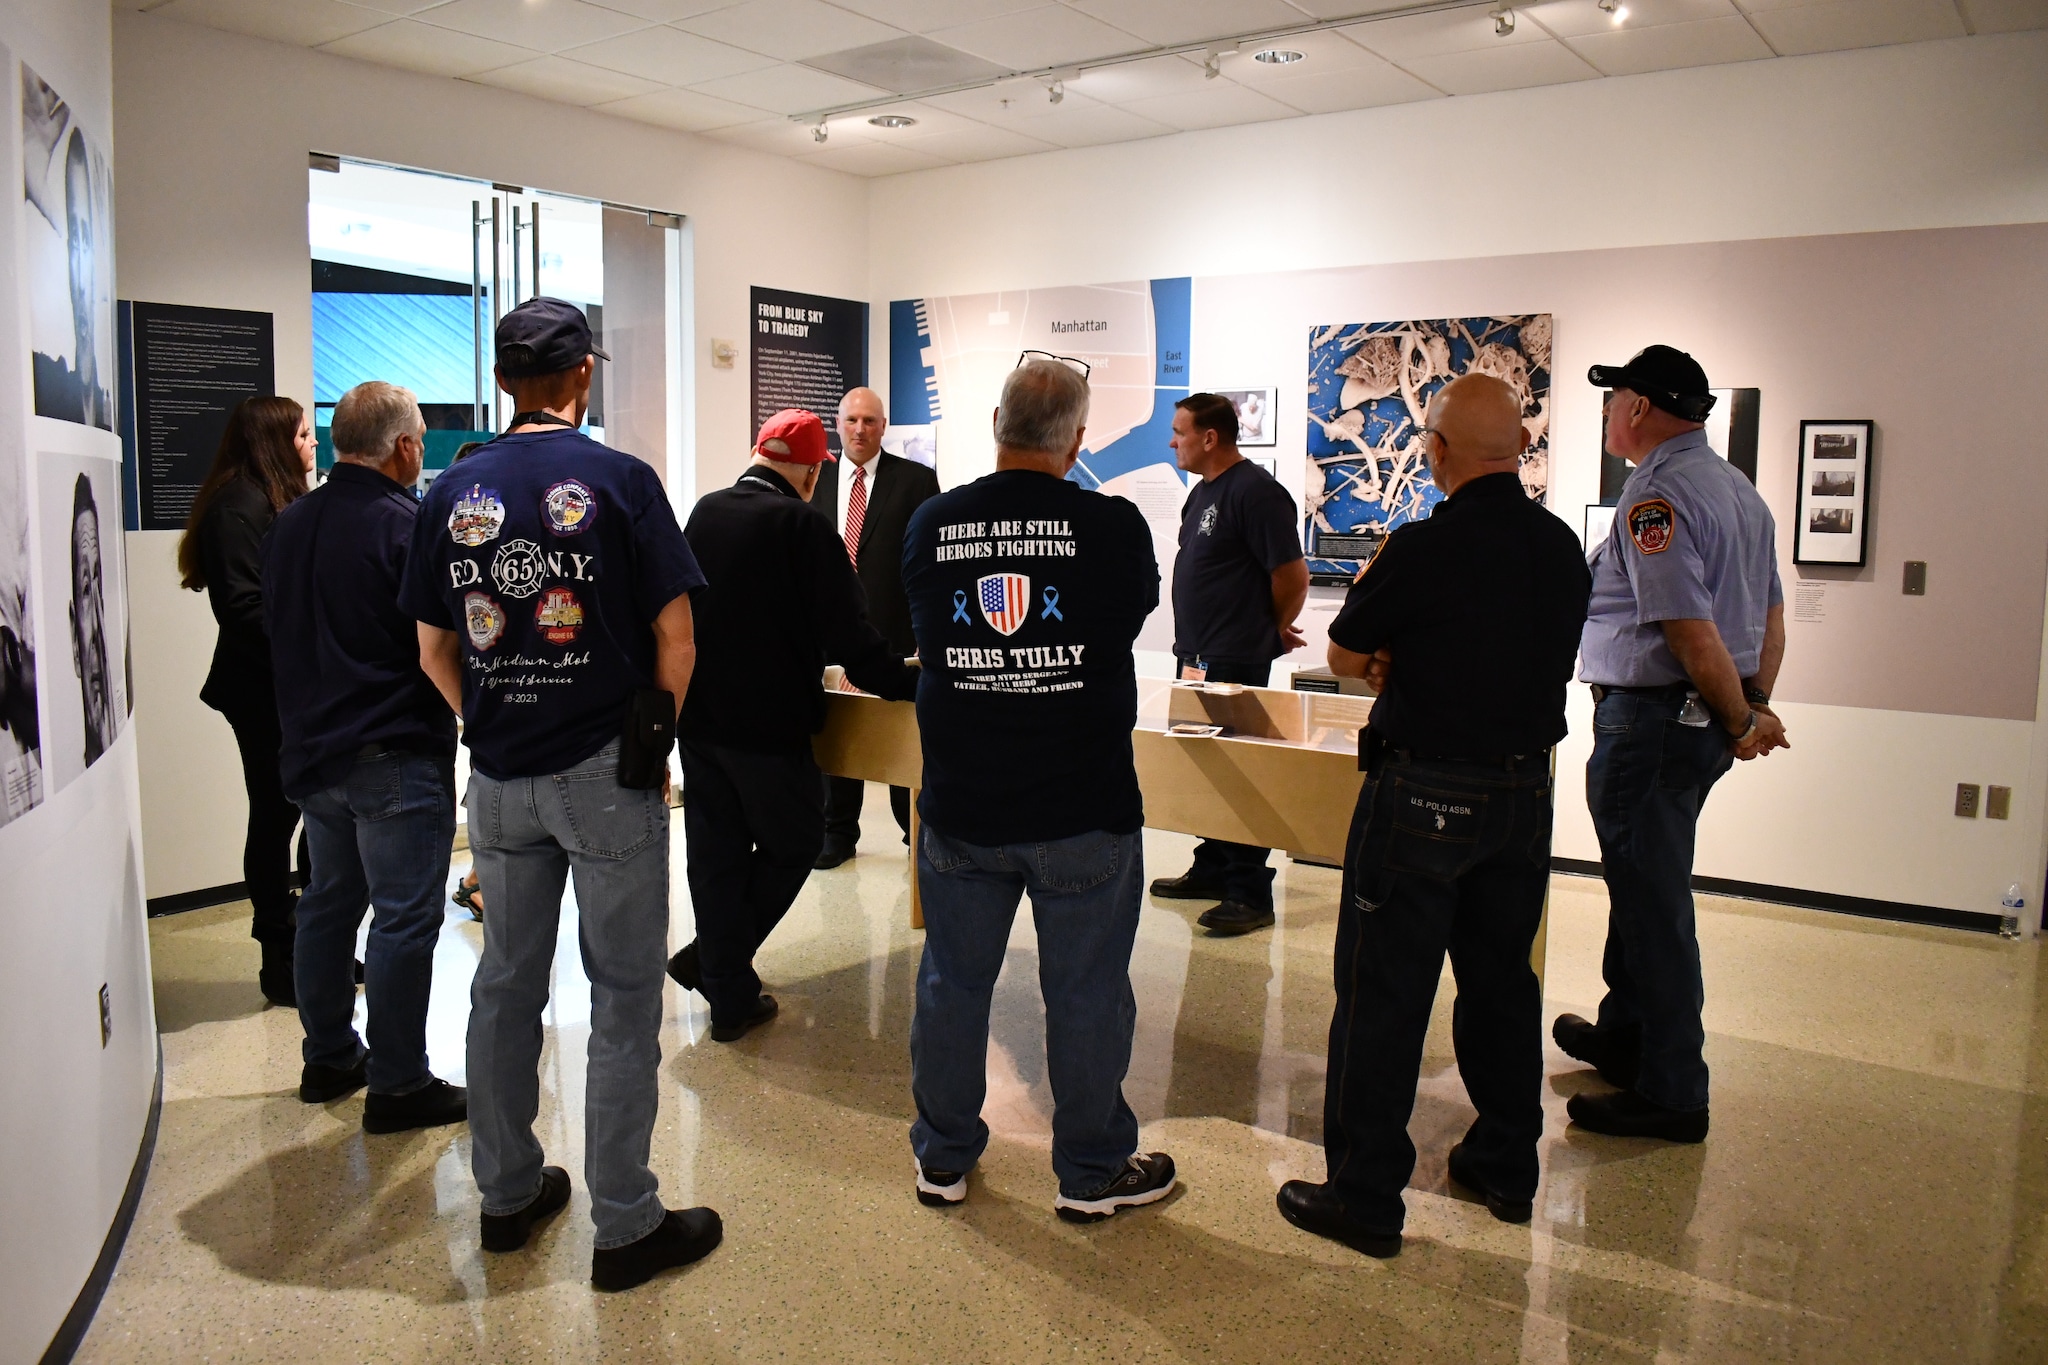 Tim Murphy and a group of fellow responders viewing the Health Effects of 9/11 Exhibition.